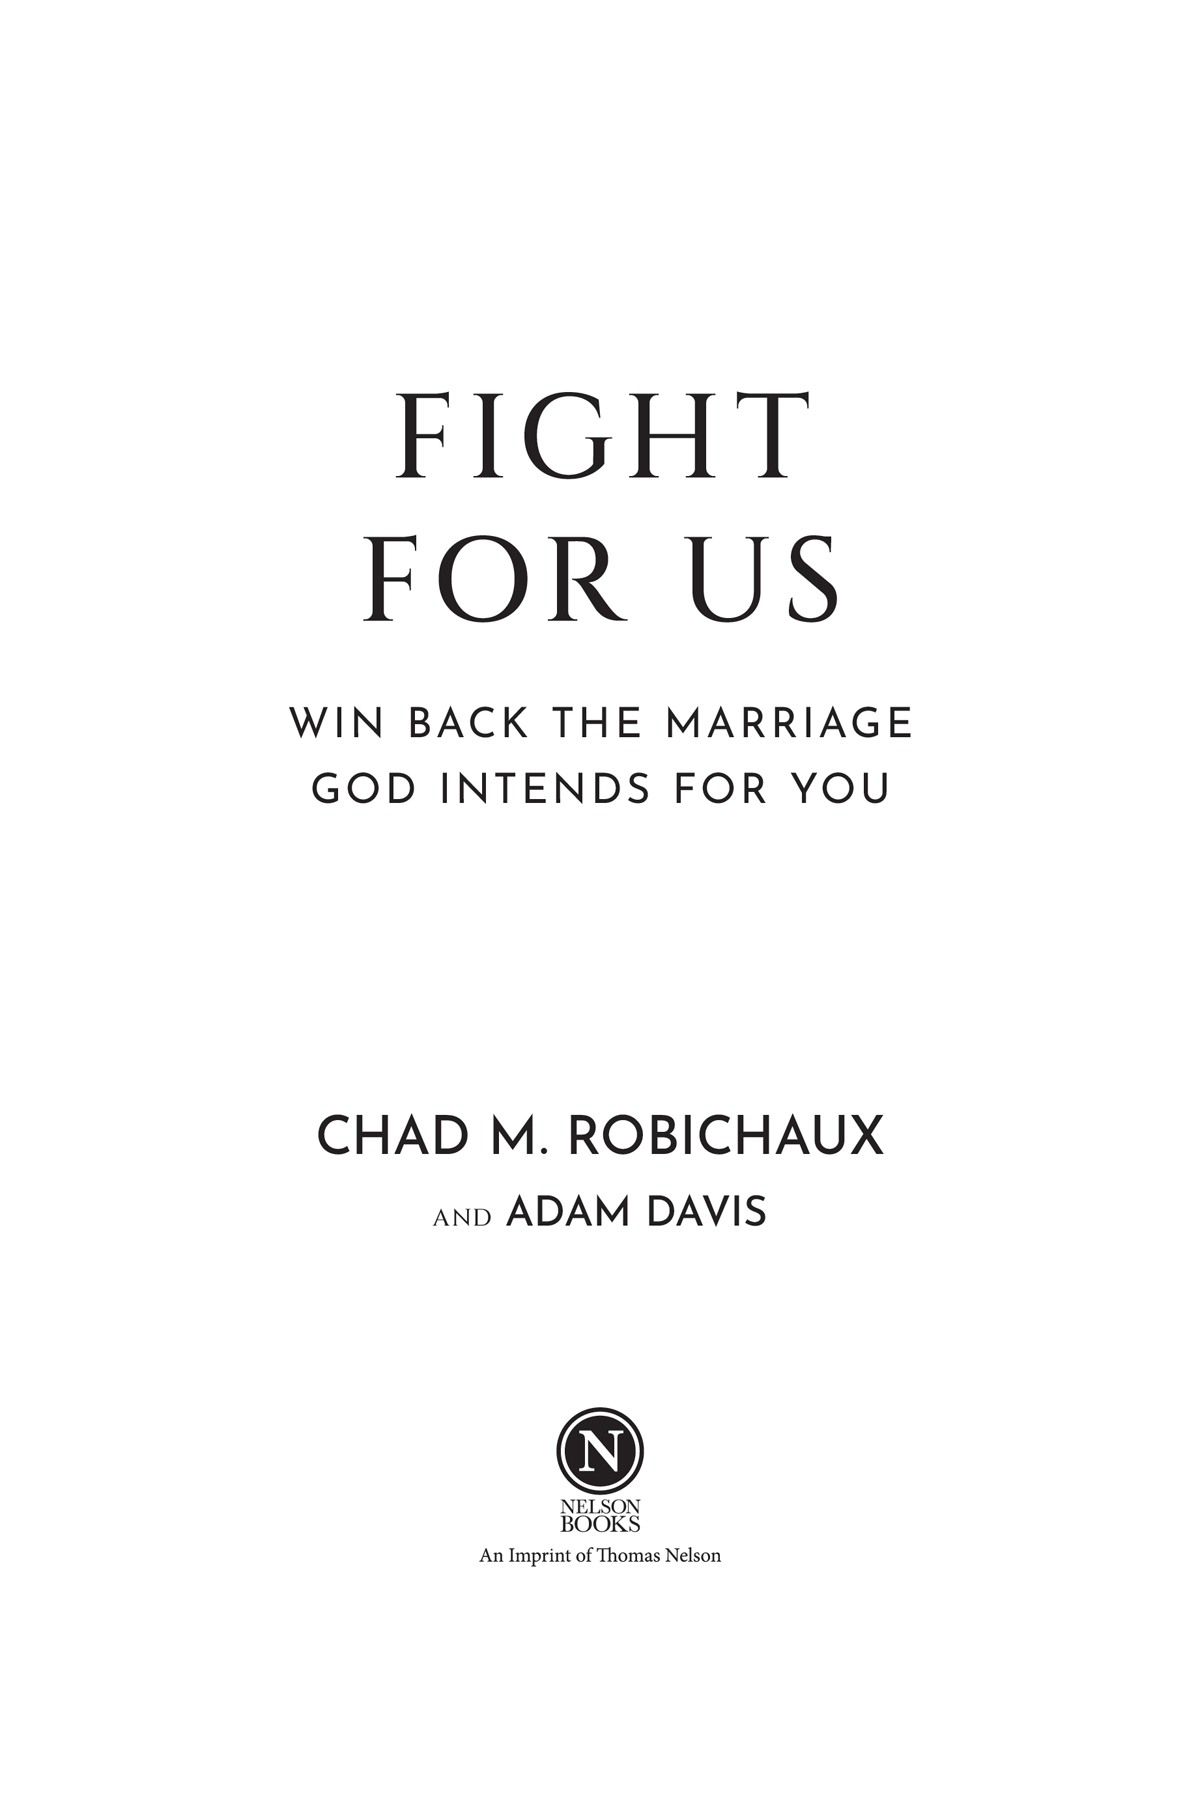 Fight for Us 2022 Chad Robichaux and Adam Davis All rights reserved No - photo 2